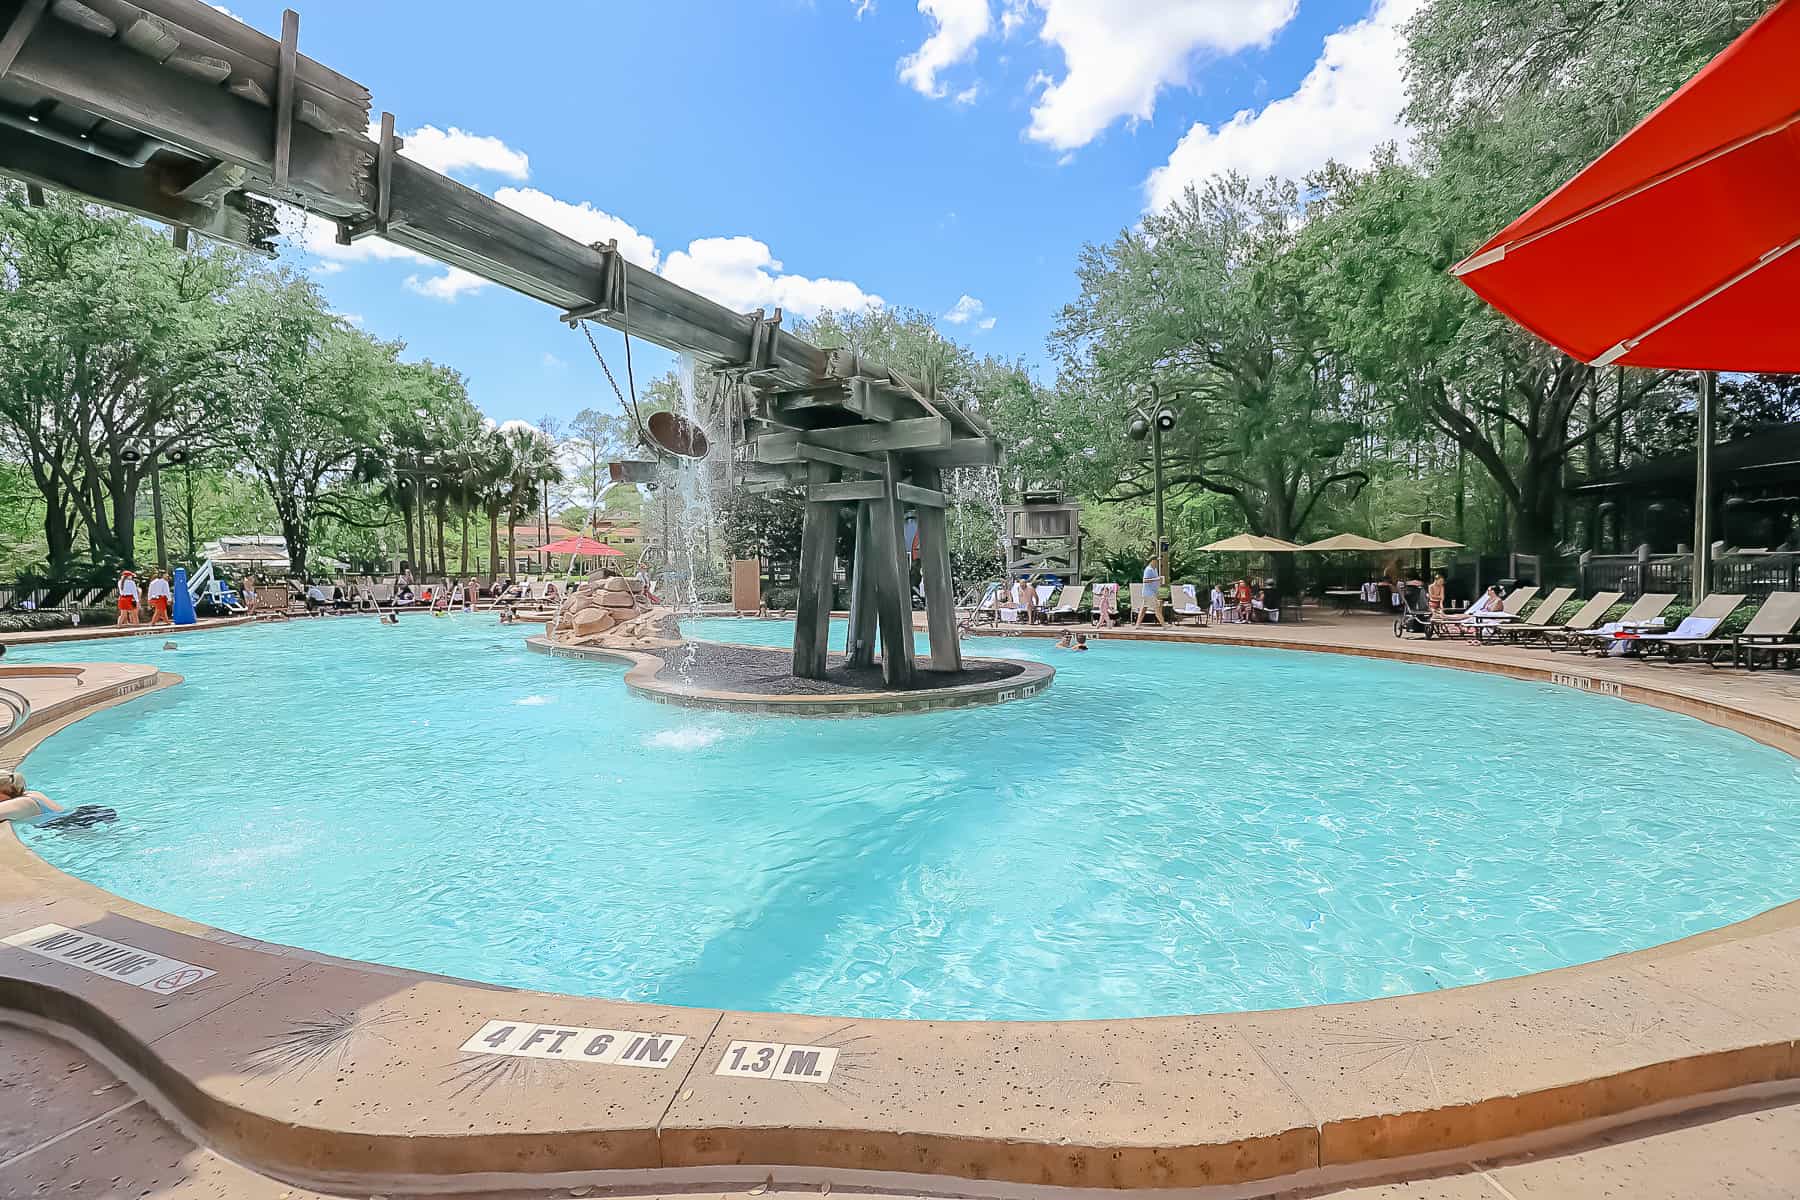 The main pool at Port Orleans Riverside is designed to look like a working mill. 